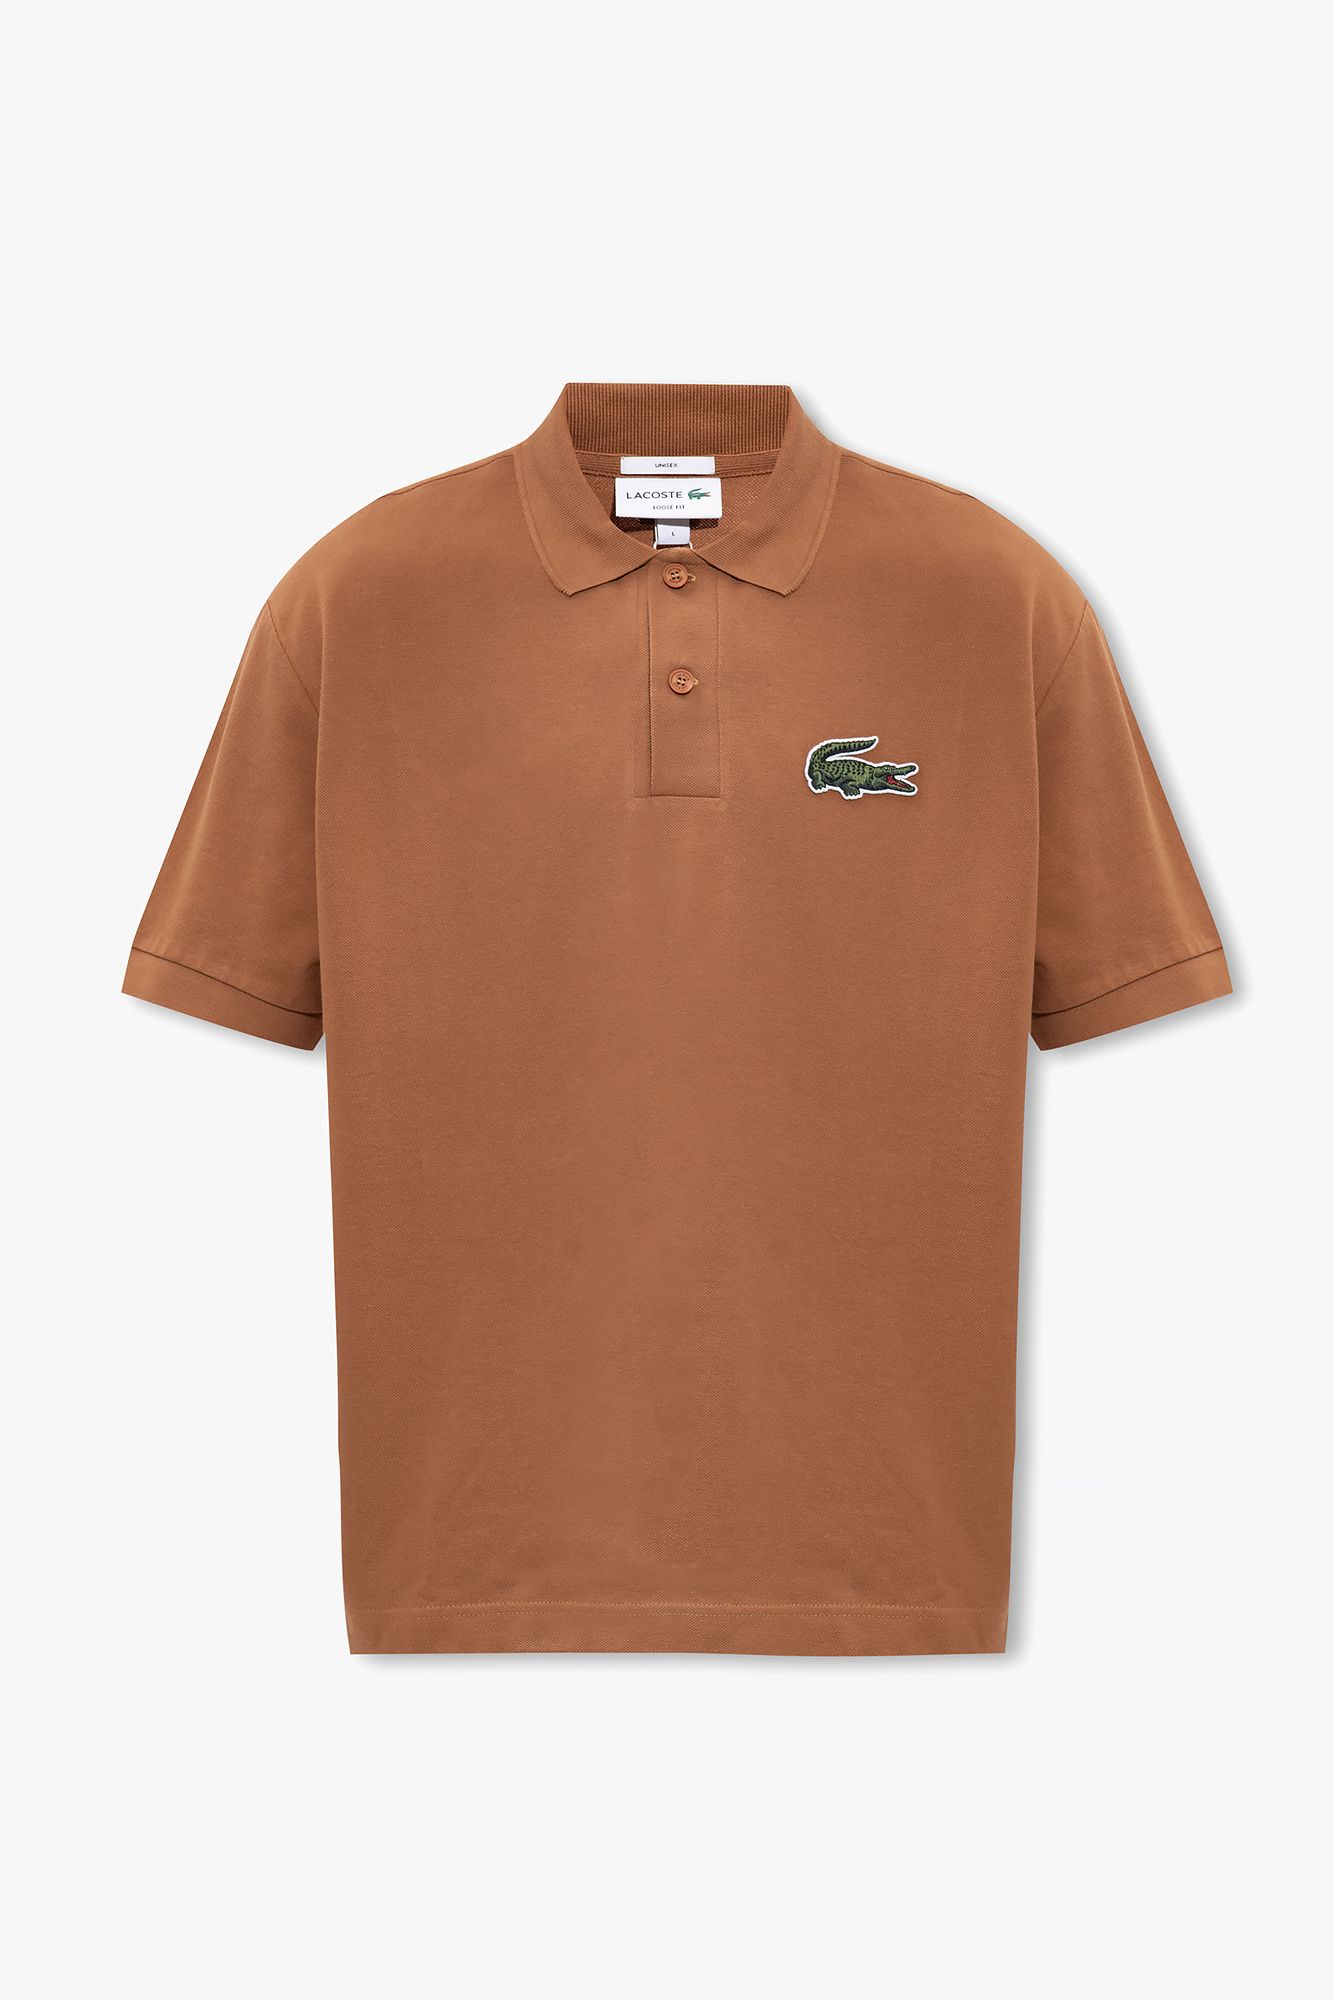 Gradient Polo 1992 Sleeve Tee - Brown Polo shirt with Lacoste InteragencyboardShops Norway